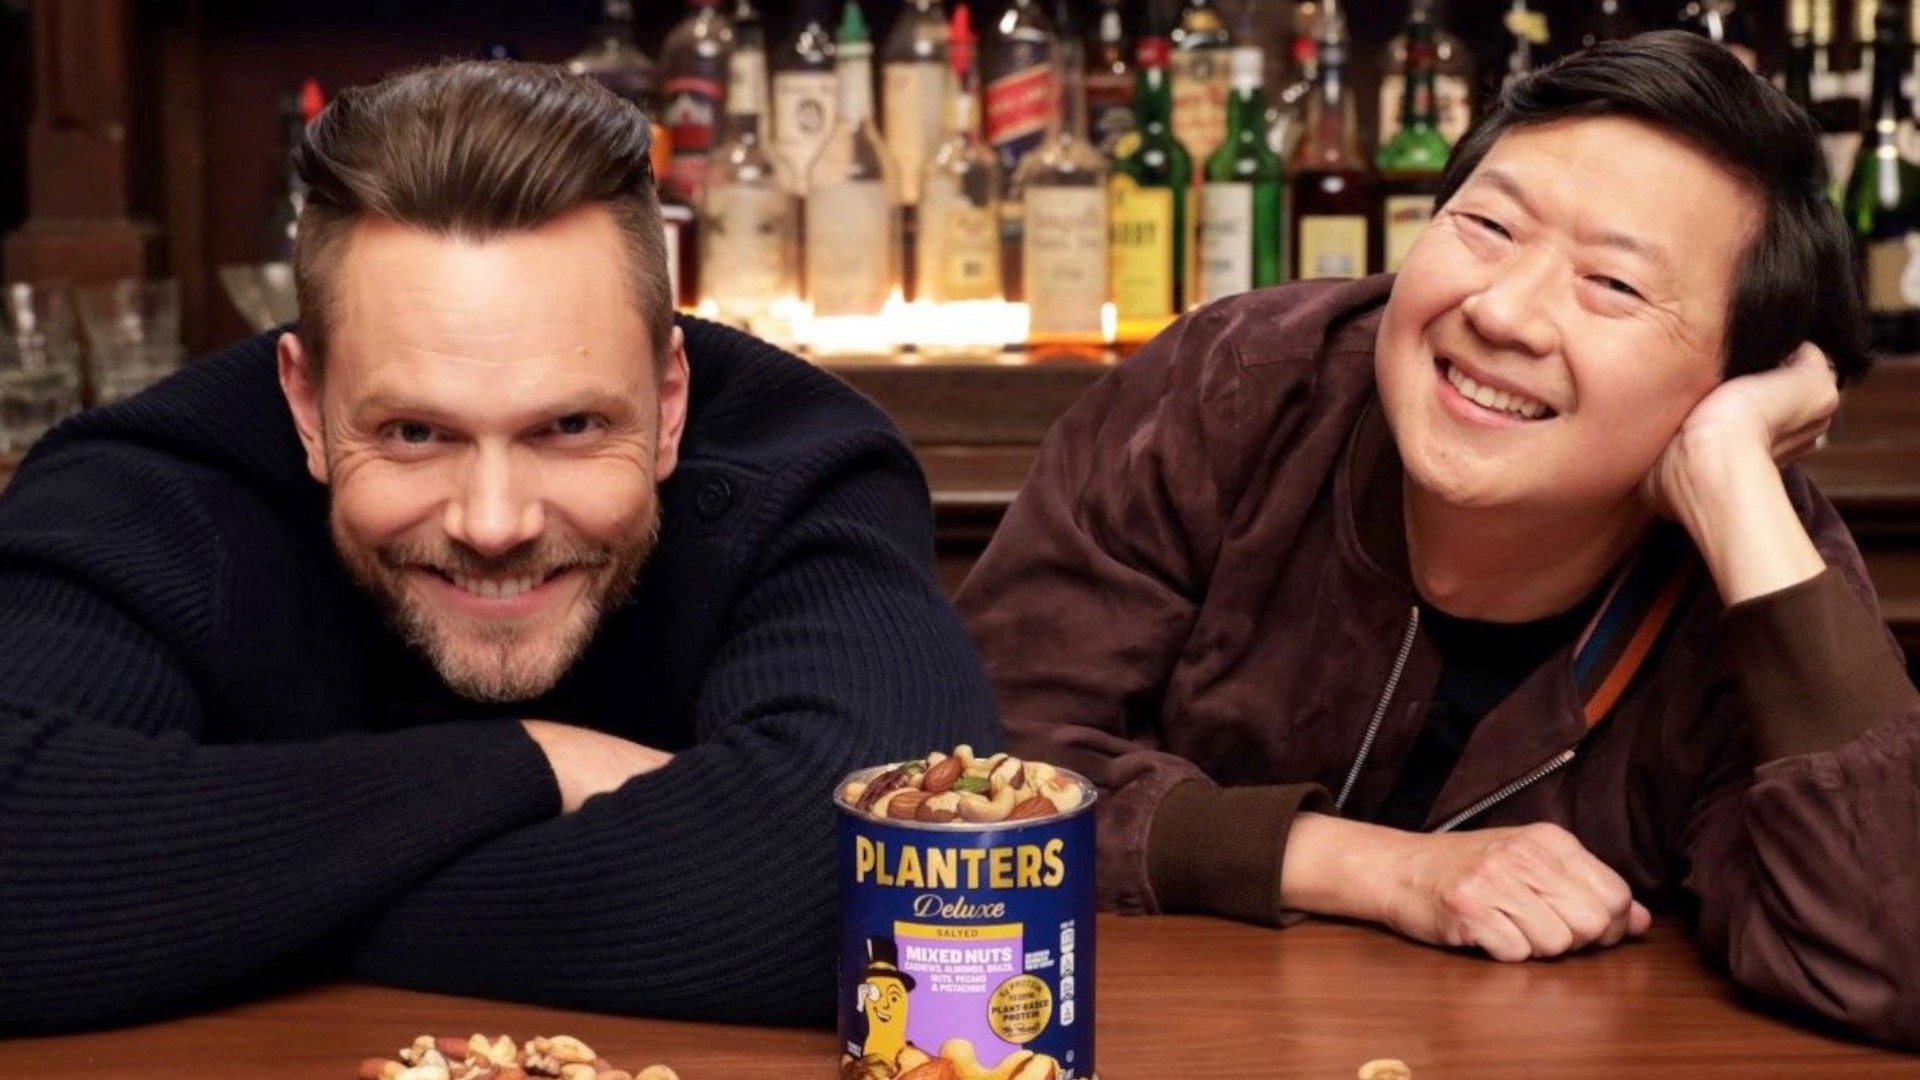 How do you eat mixed nuts? Watch Ken Jeong and Joel McHale argue in the latest Planters Super Bowl ad. Buzz60's Maria Mercedes Galuppo has the story.